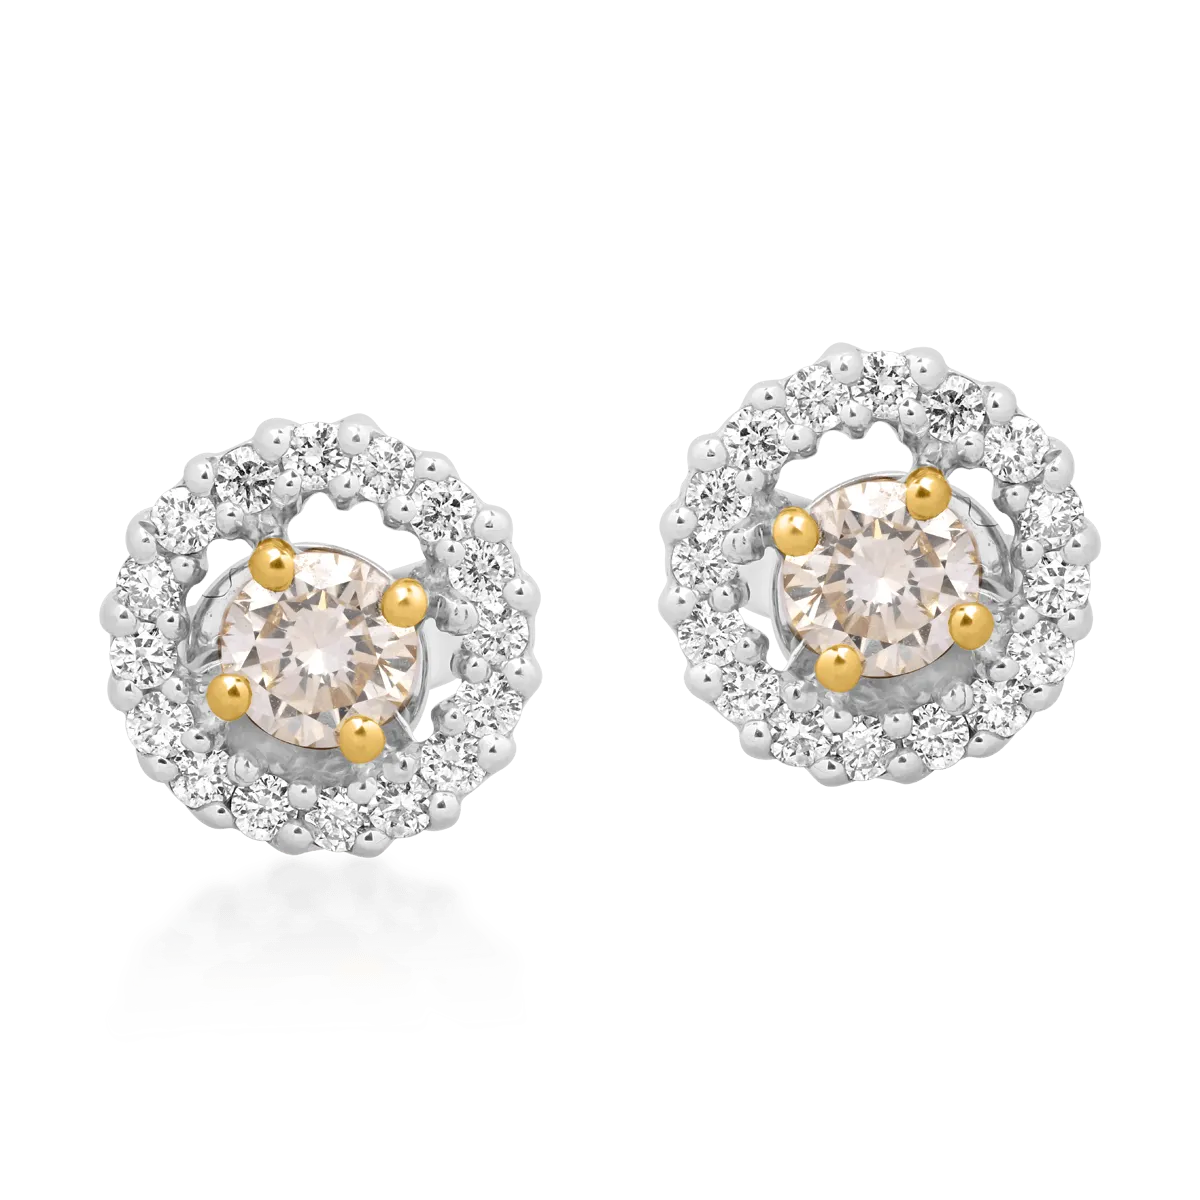 18K white gold earrings with 0.41ct yellow diamonds and 0.33ct white diamonds